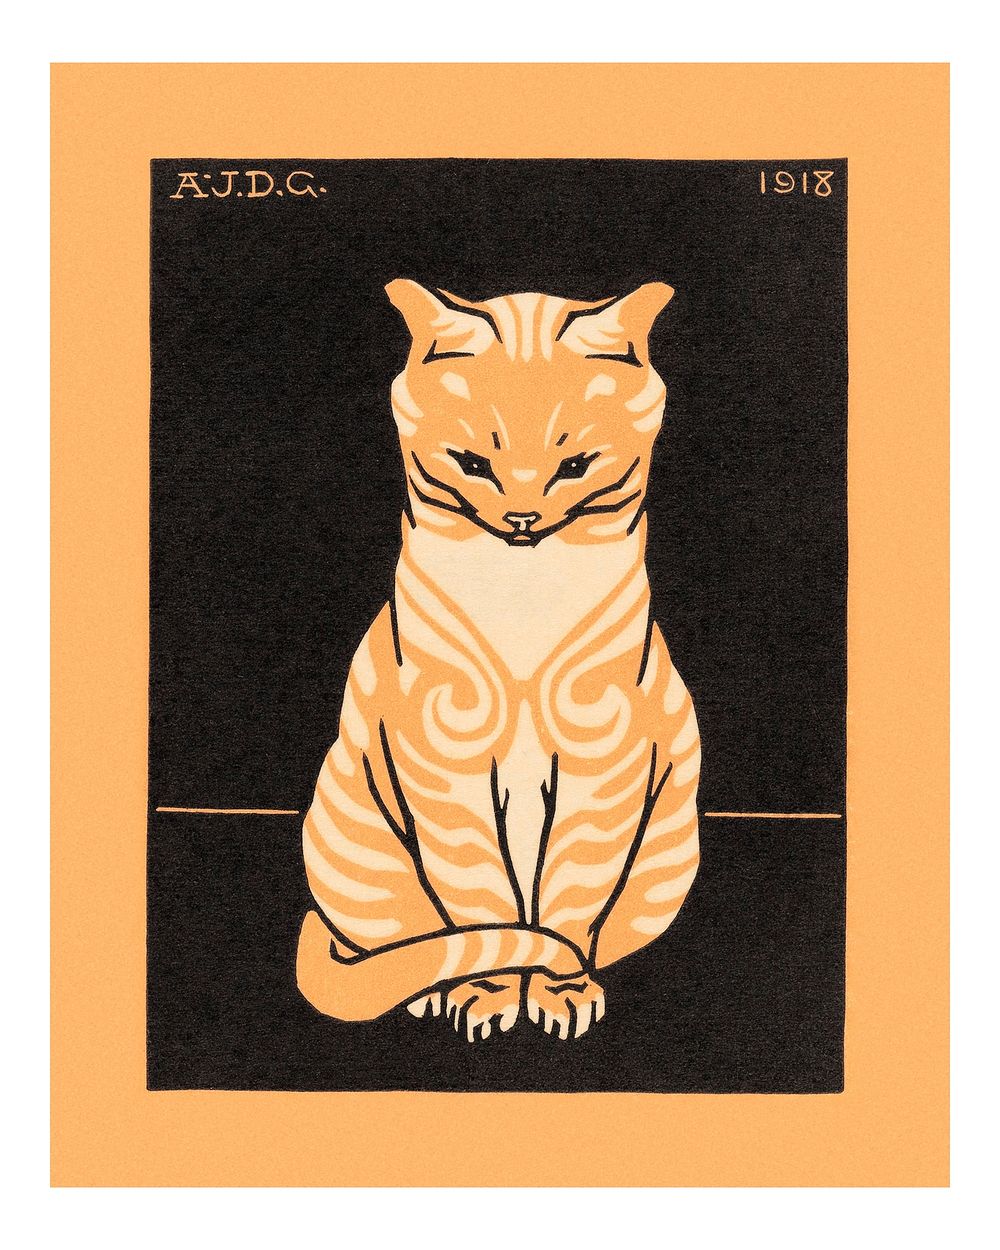 Vintage sitting cat illustration wall art print and poster design remix from the original artwork. 